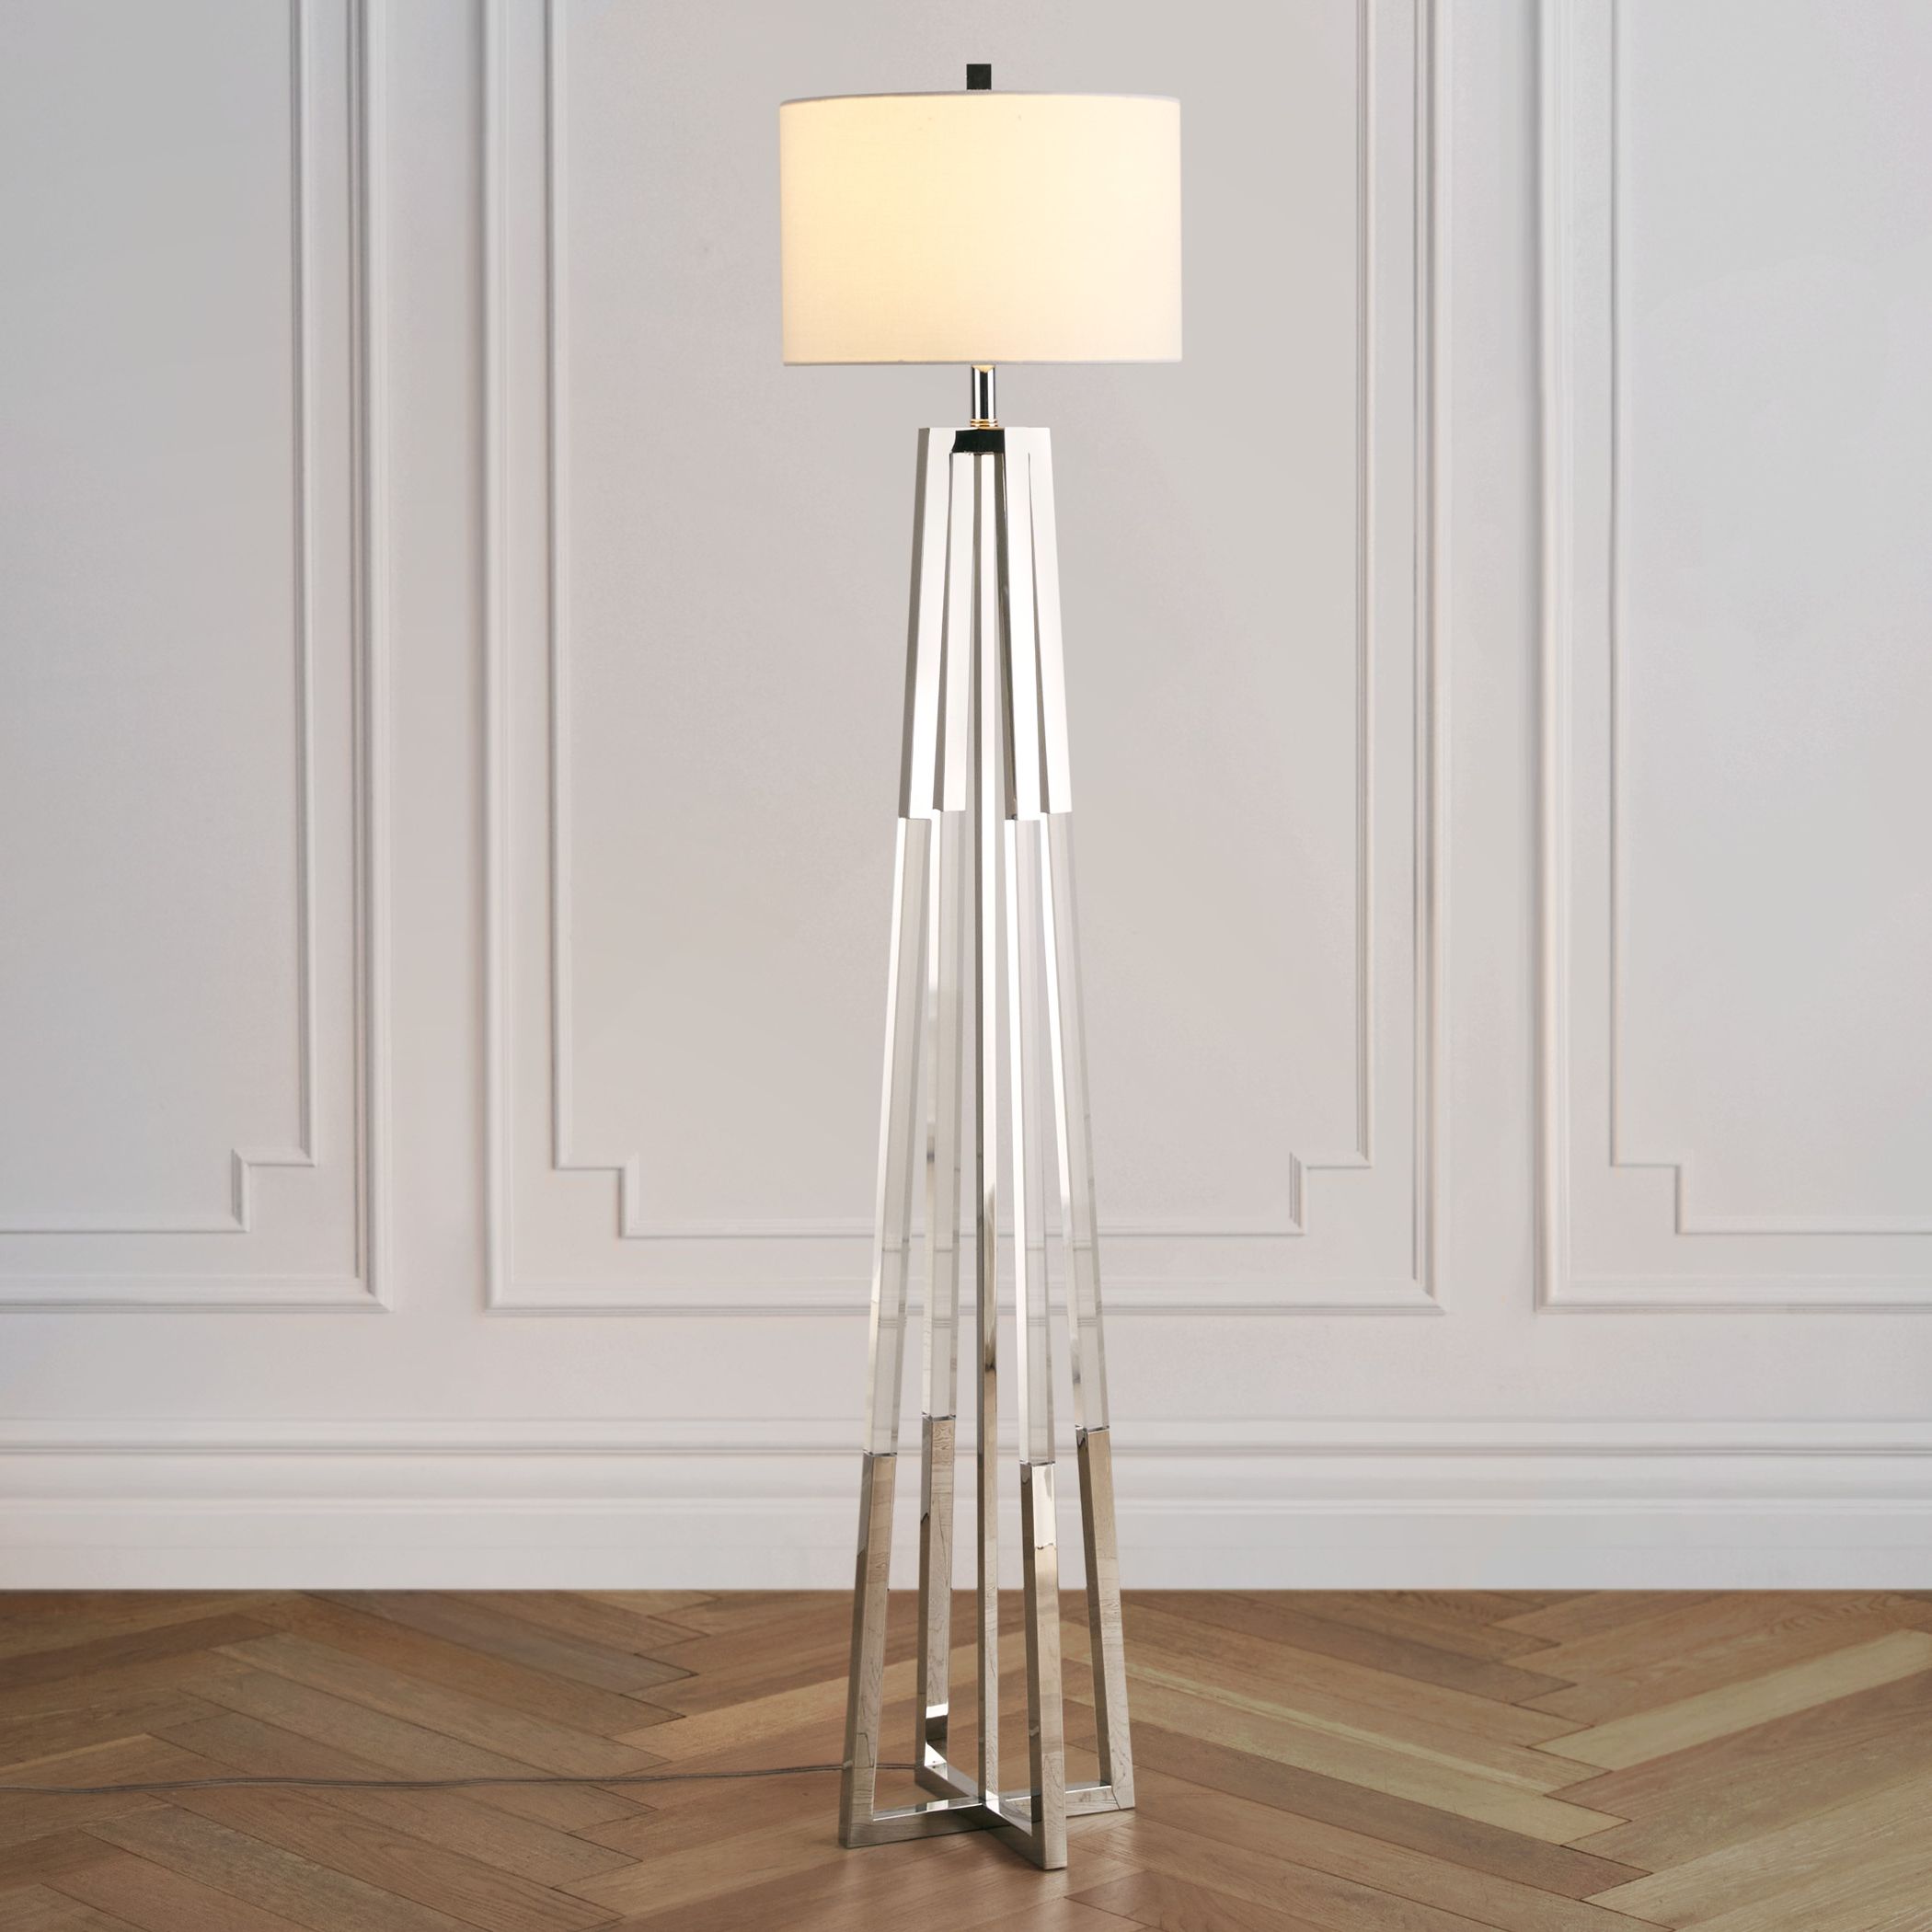 Widely Used Acrylic Floor Lamps Inside Rollins Floor Lamp (View 9 of 15)